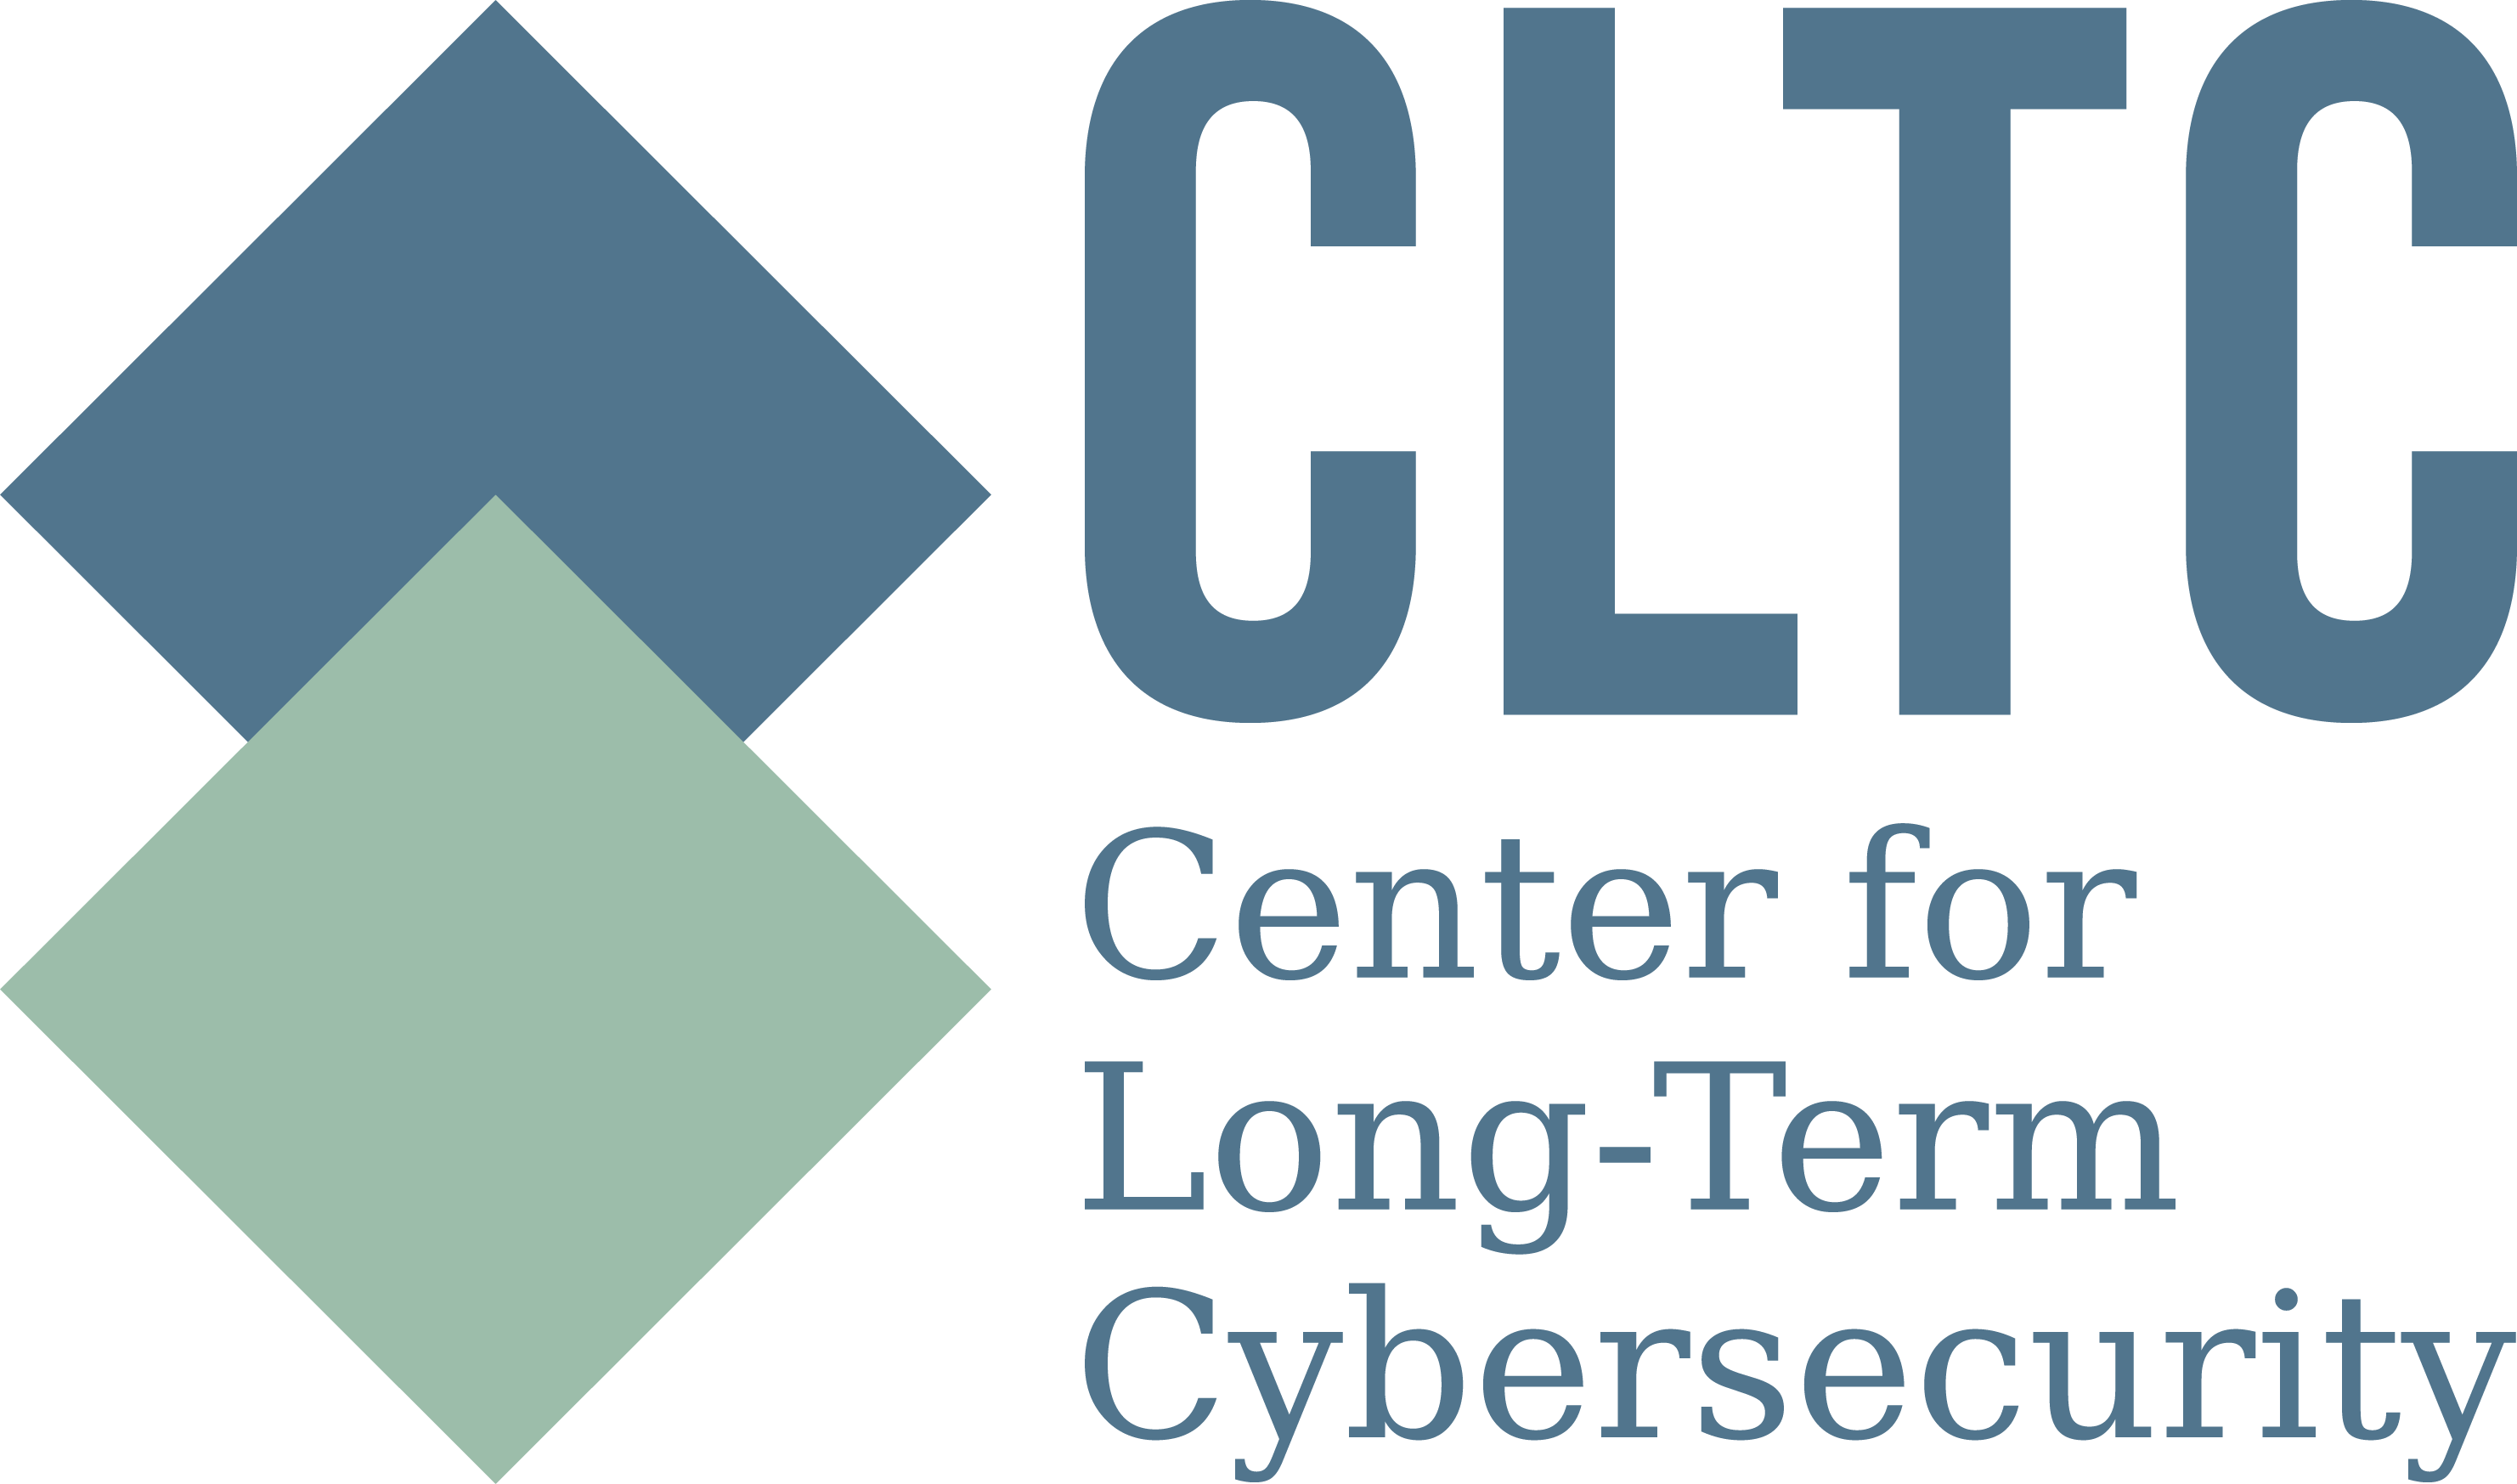 center_for_long-term_cybersecurity_(logo).png